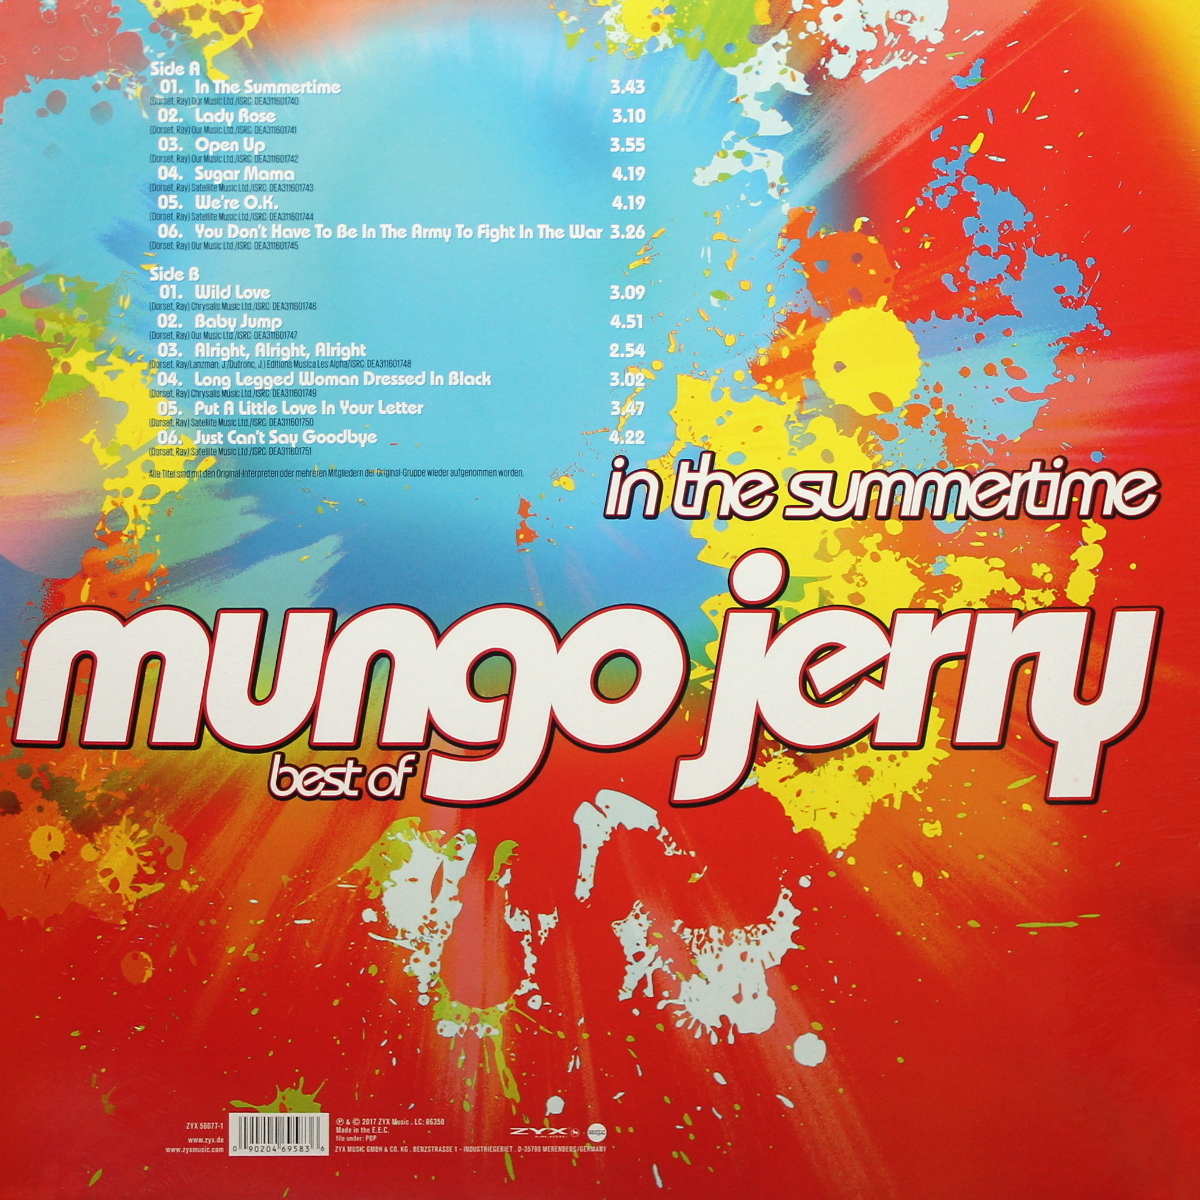 Mungo jerry in the summertime. Mango Jerry - in the Summertime пластинка. Mungo Jerry LP. In the Summertime.